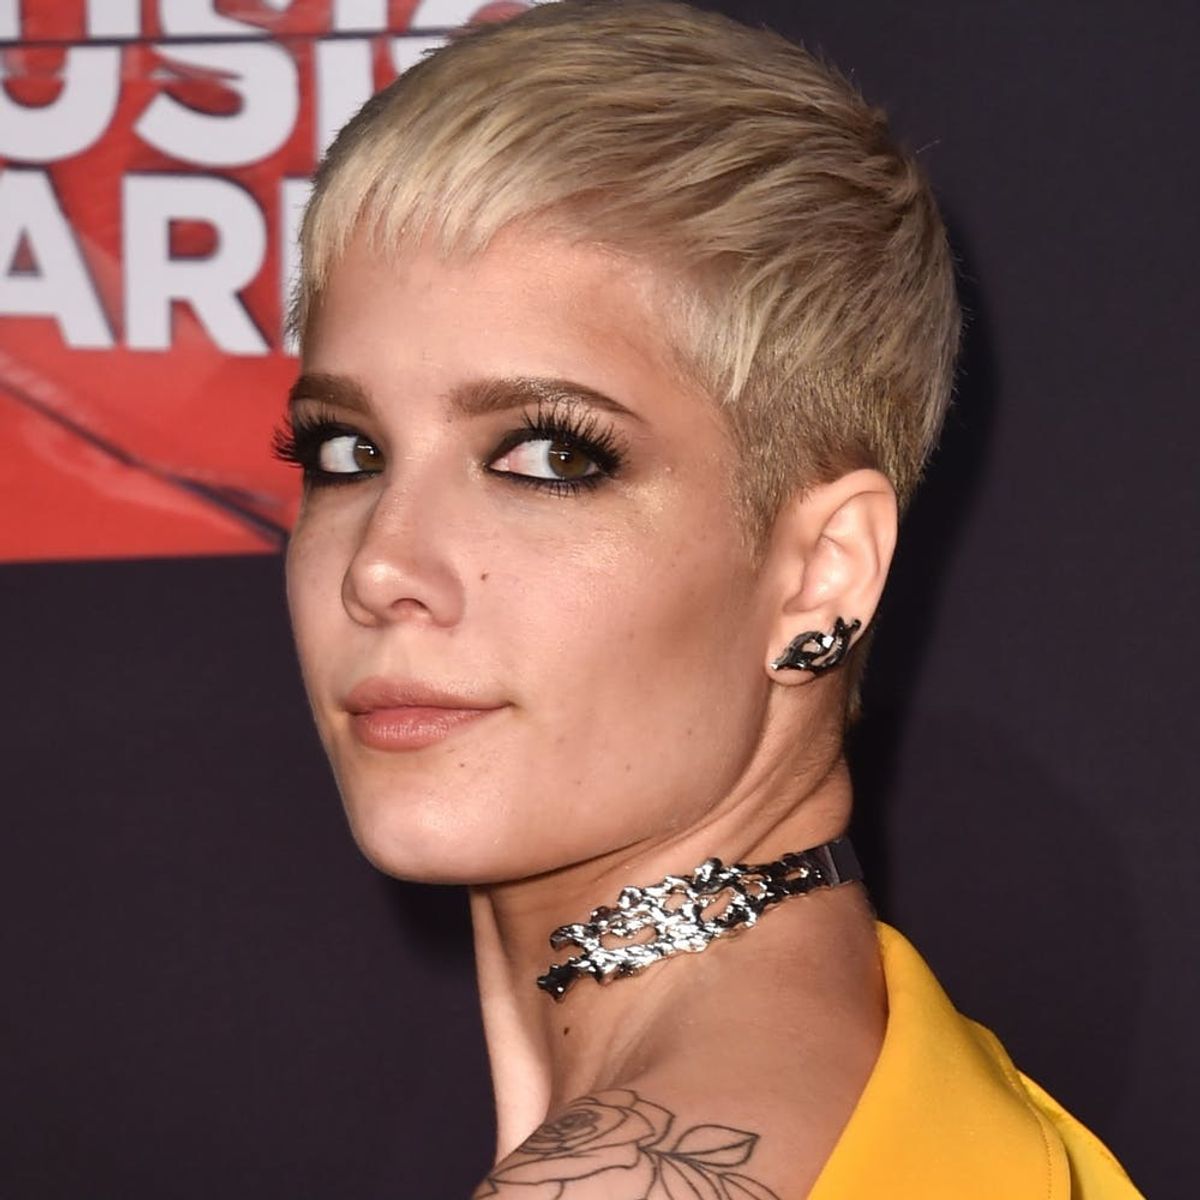 Halsey Is Speaking Up About Sexism at Coachella (and in the Music Industry)